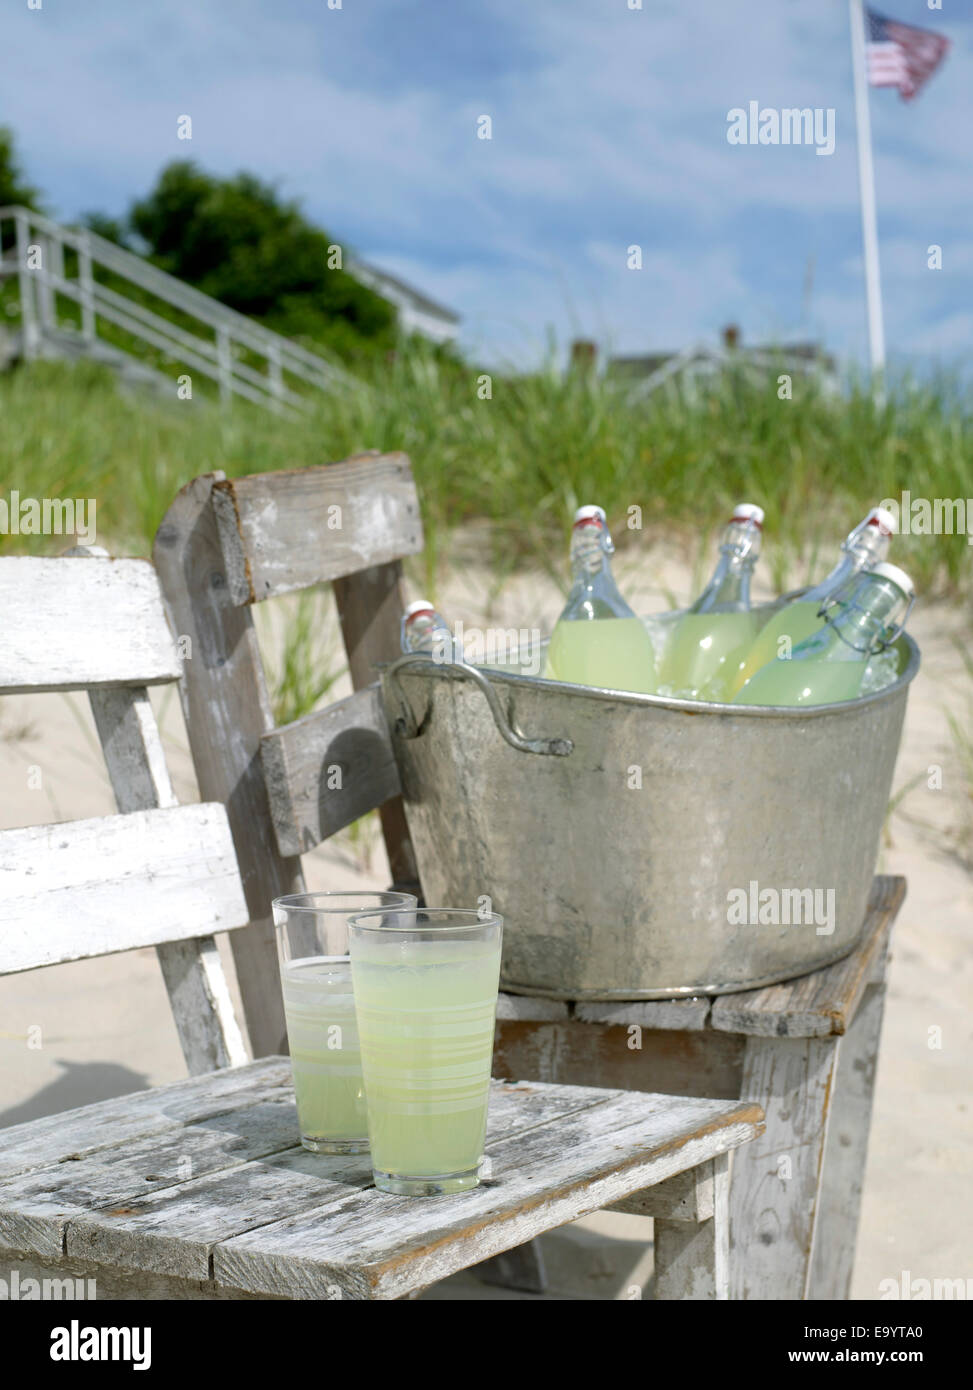 glasses and bottles of lemon aide at beach Stock Photo